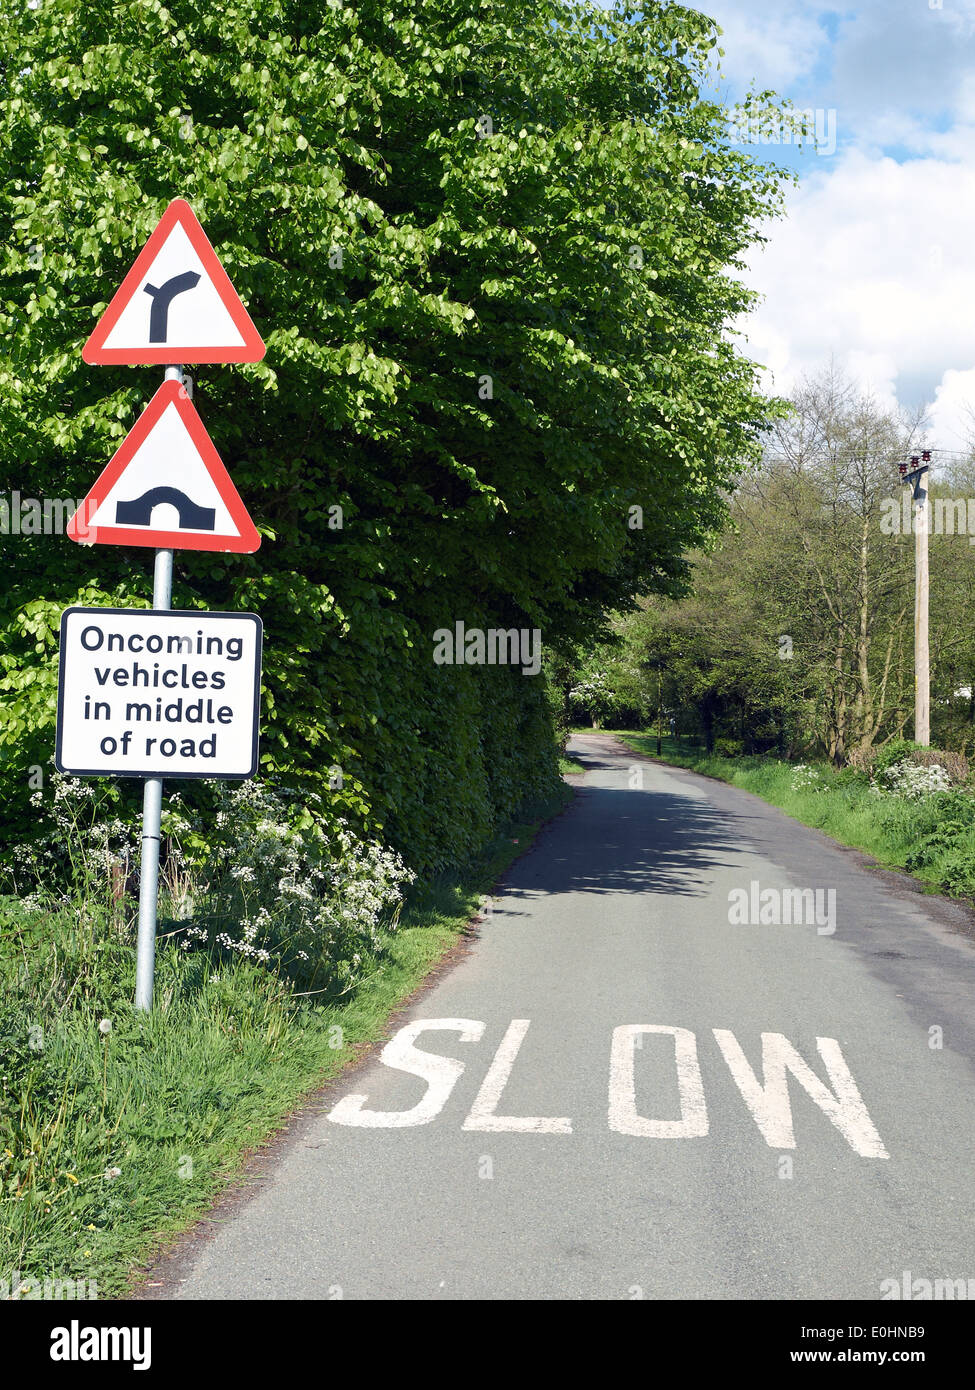 Road narrows sign Oncoming vehicles in middle of road in Cheshire UK Stock Photo